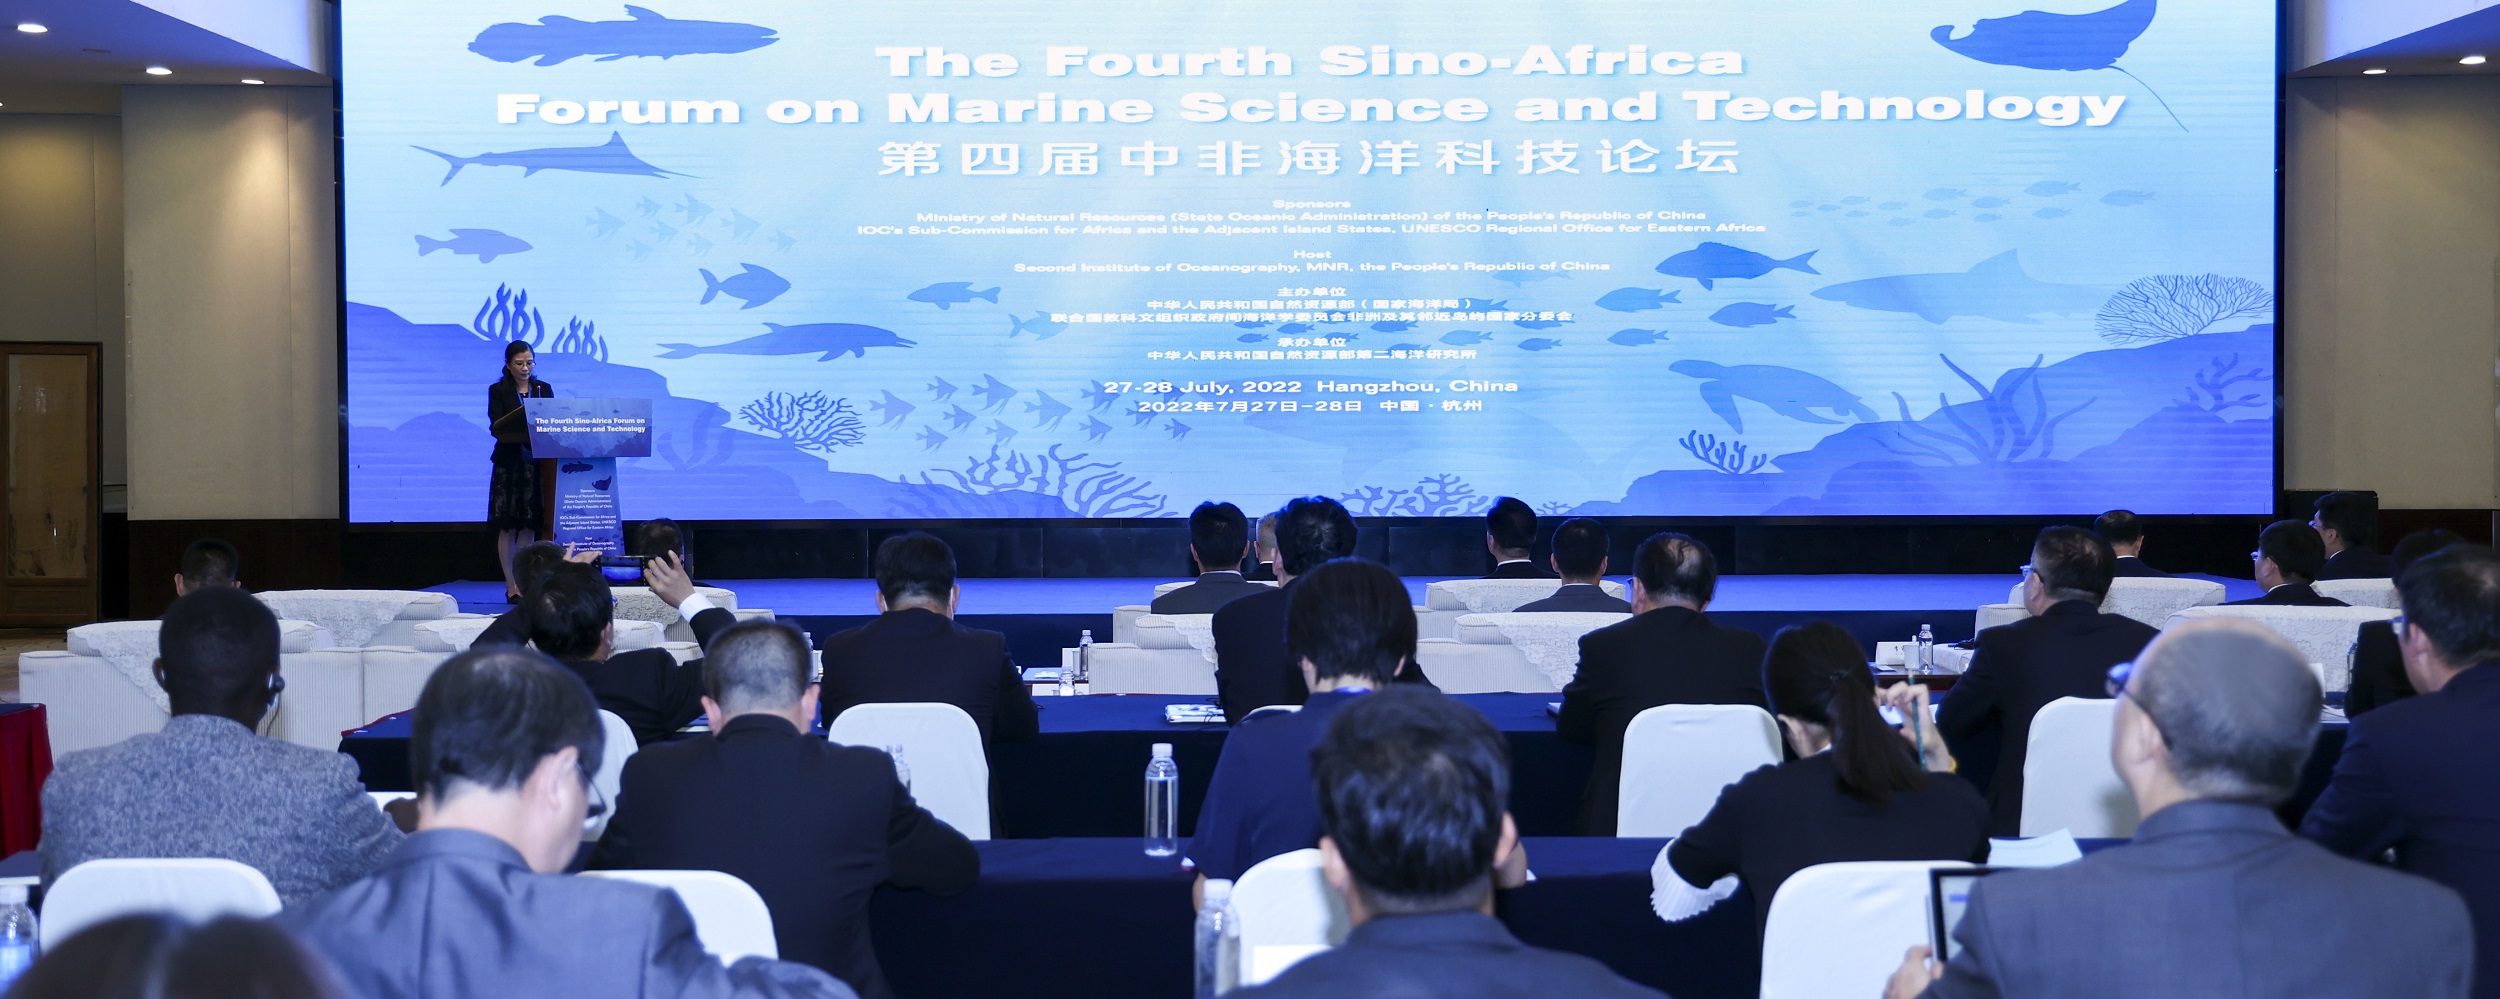 The 4th China-Africa Forum on Marine Science and Technology Held in Hangzhou.